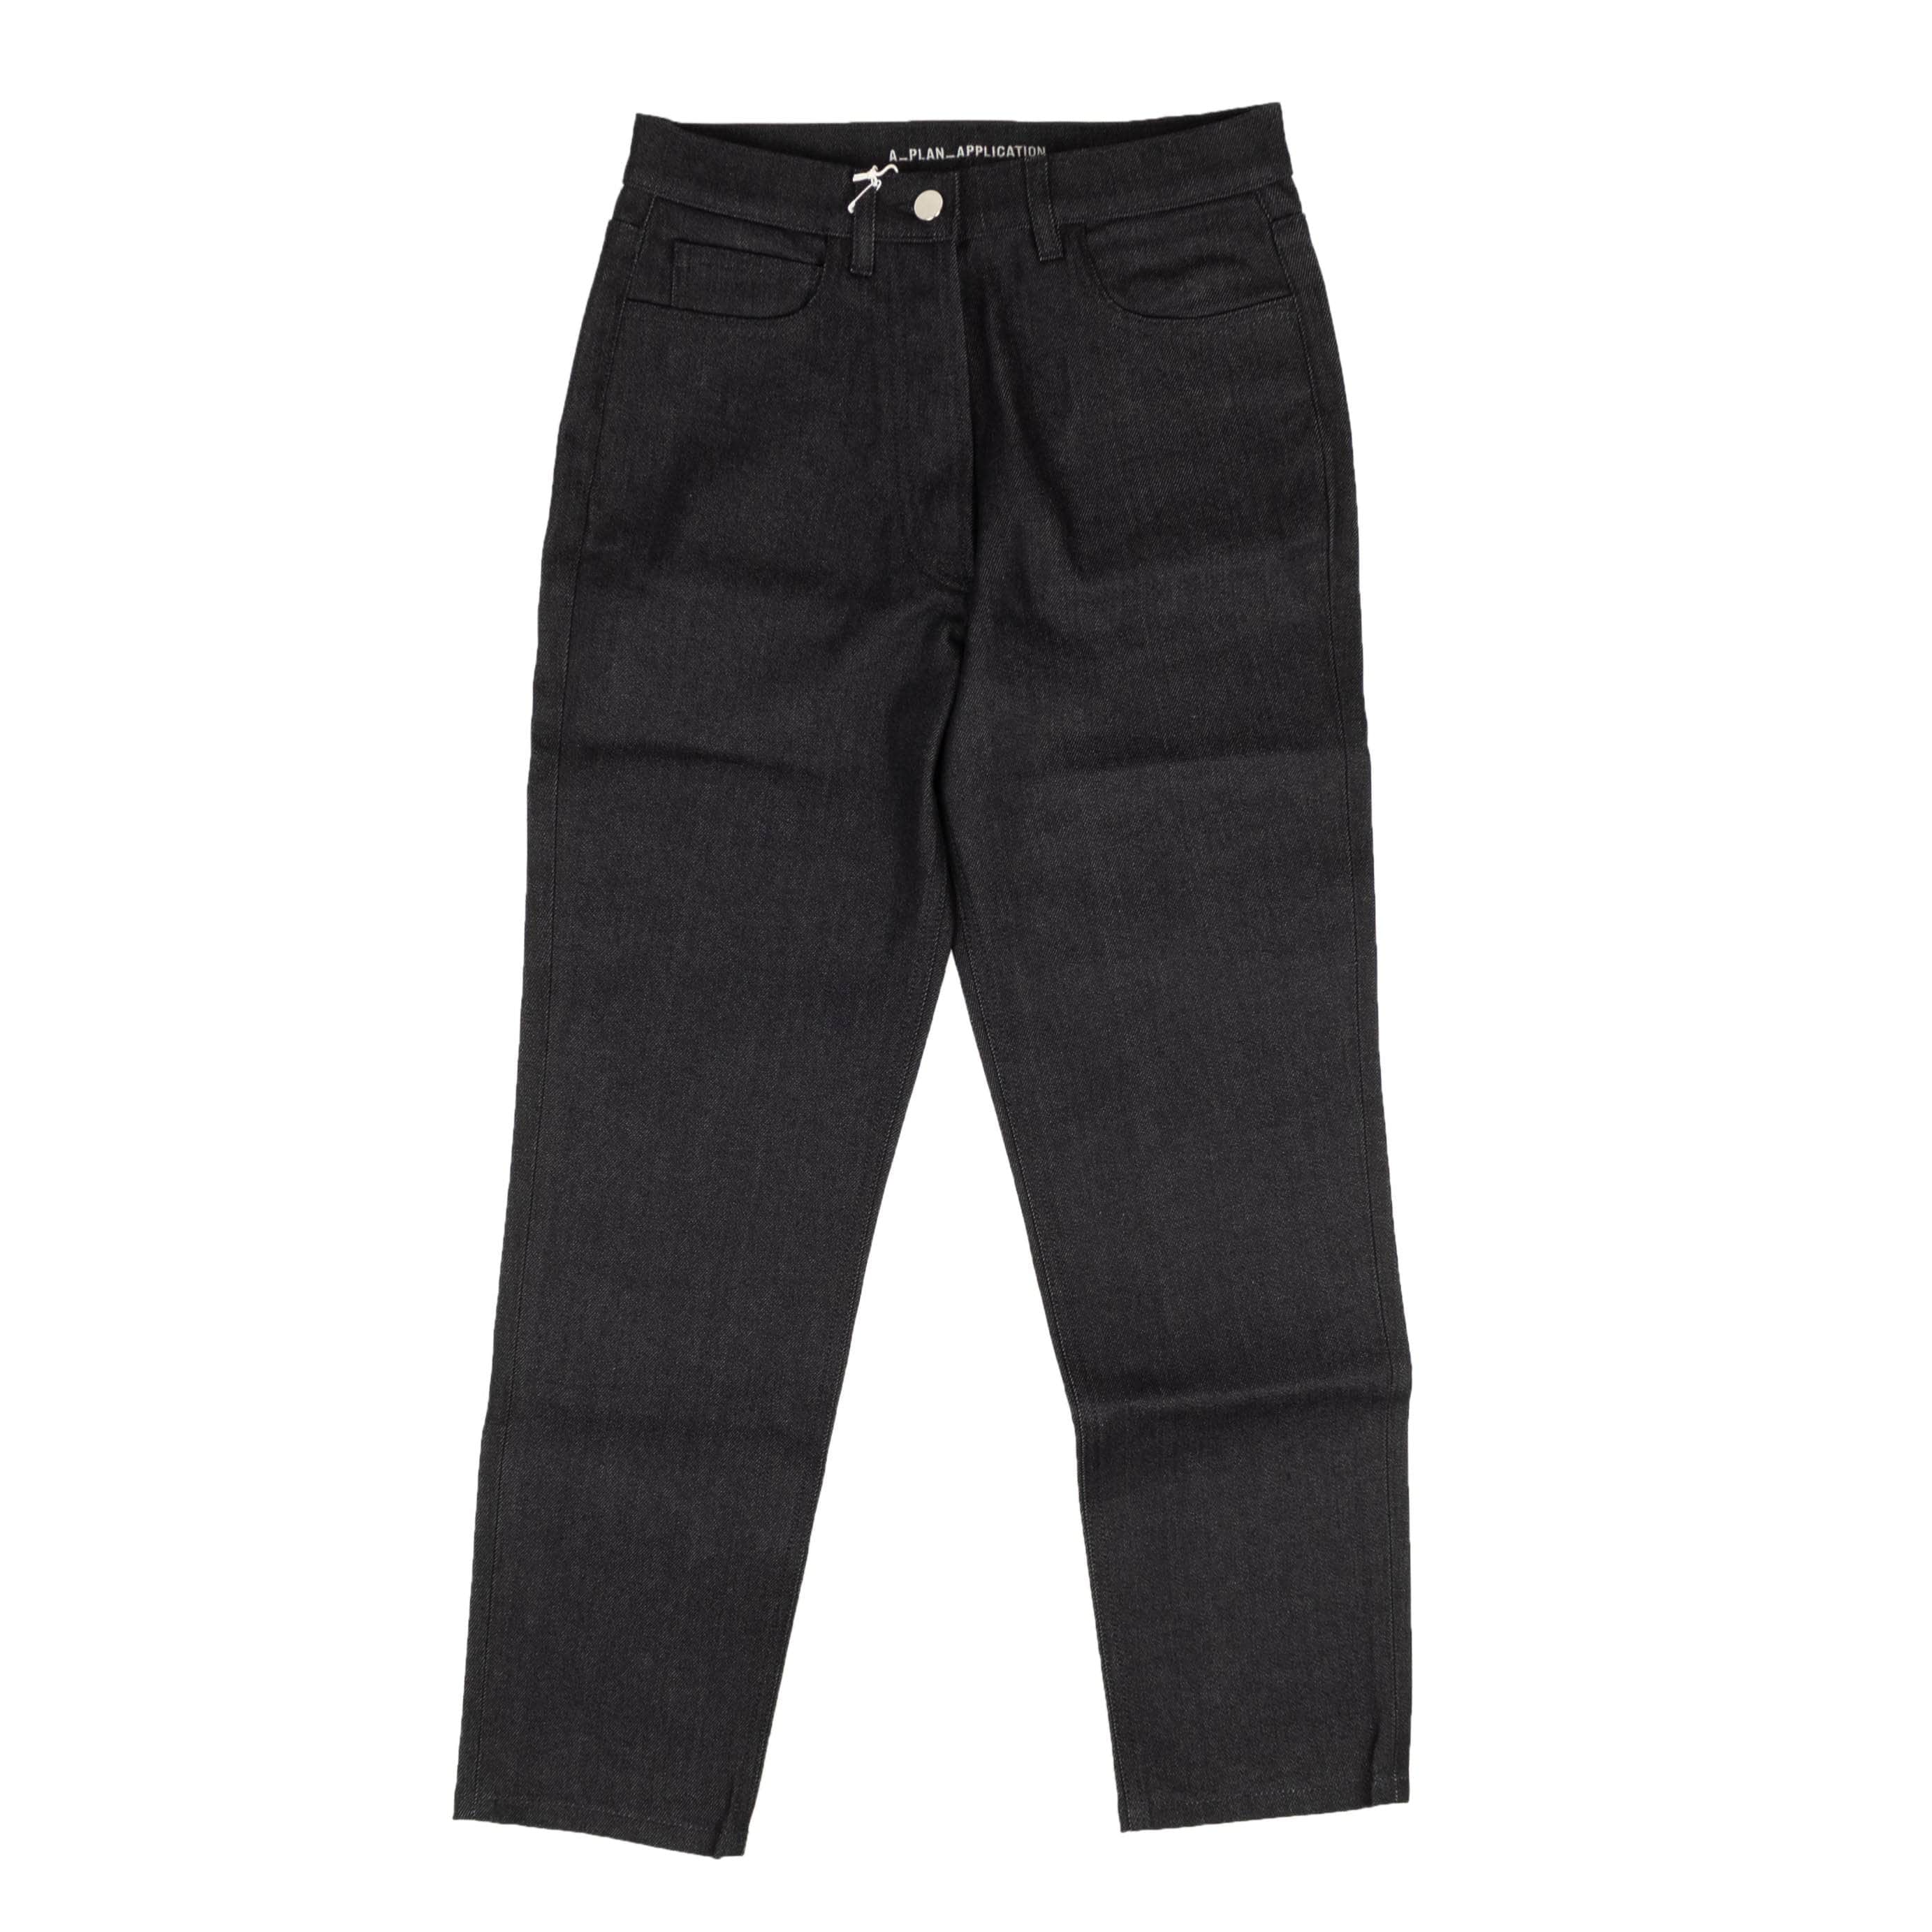 A_Plan_Application a_plan_application, channelenable-all, chicmi, couponcollection, gender-womens, main-clothing, size-26, size-27, under-250, womens-straight-jeans Blue Cotton Denim Straight Jeans